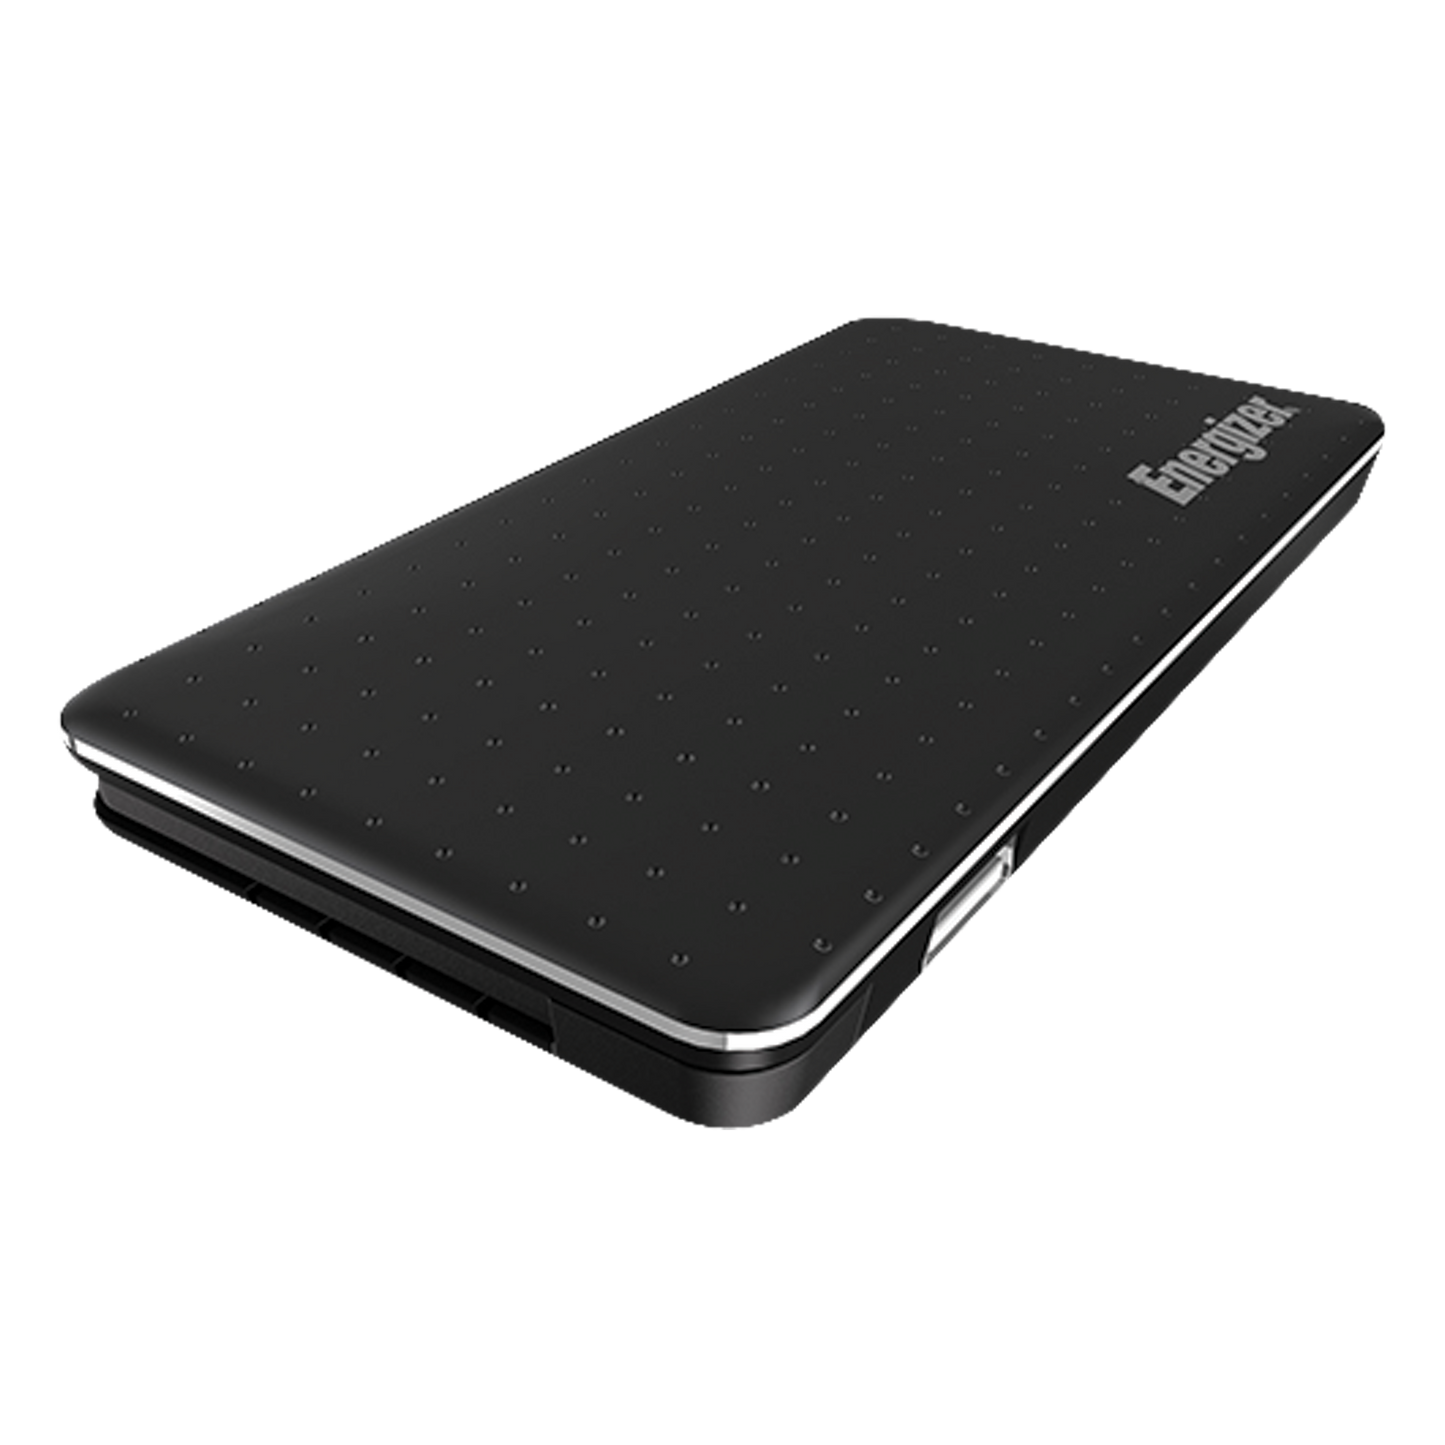 Energizer 5,000mAh Lightweight with Built-in Lightning Cable Power Bank XP5000A